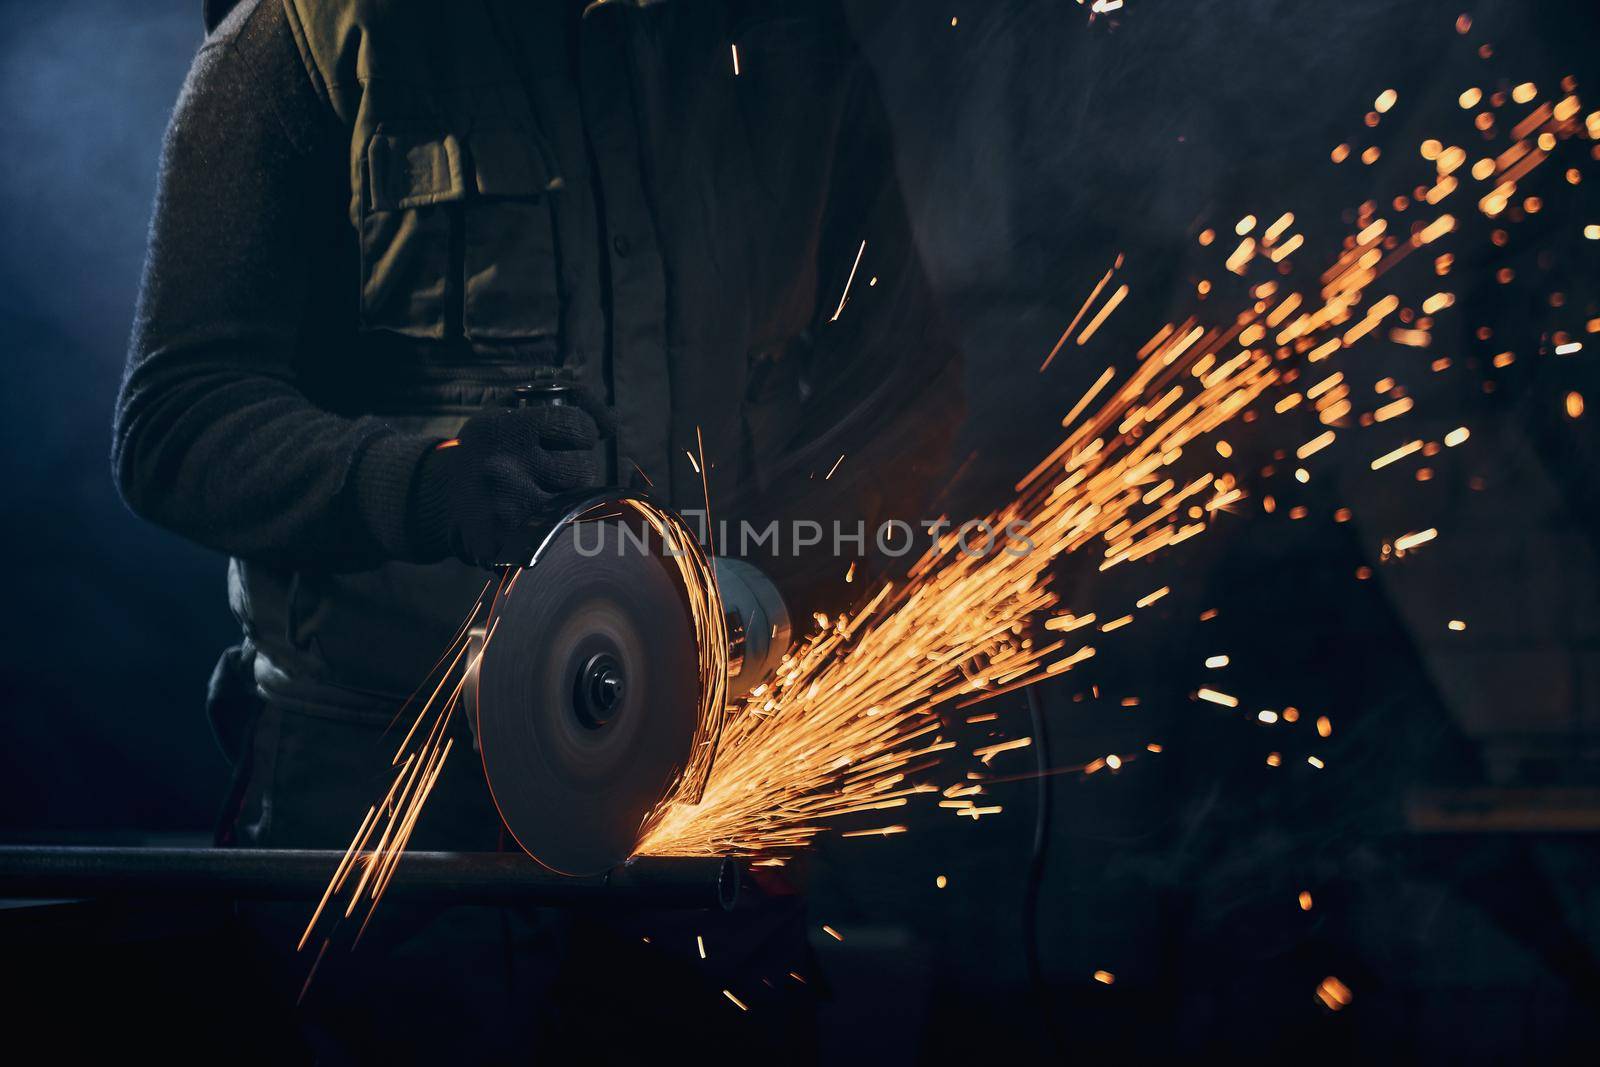 Close up of man in special dark suit and black protective gloves working angle grinder for metal with large flash sparks. Concept of process working electric steel cutter machine.